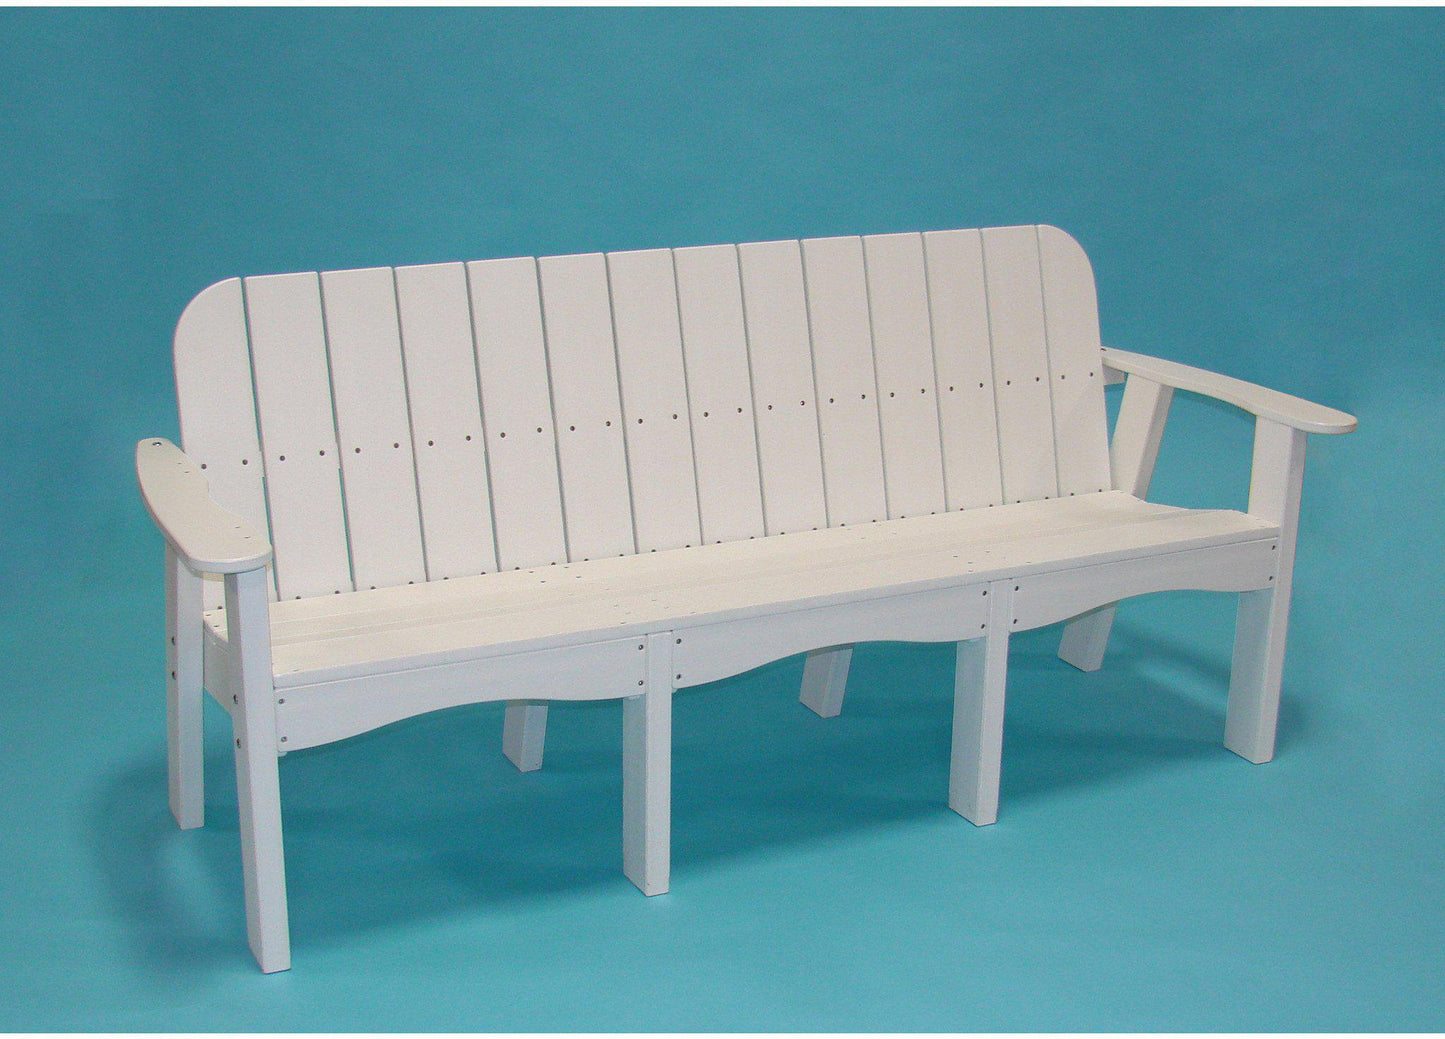 Tailwind Furniture Recycled Plastic 76" Victorian Bench - VB 720 - Rocking Furniture